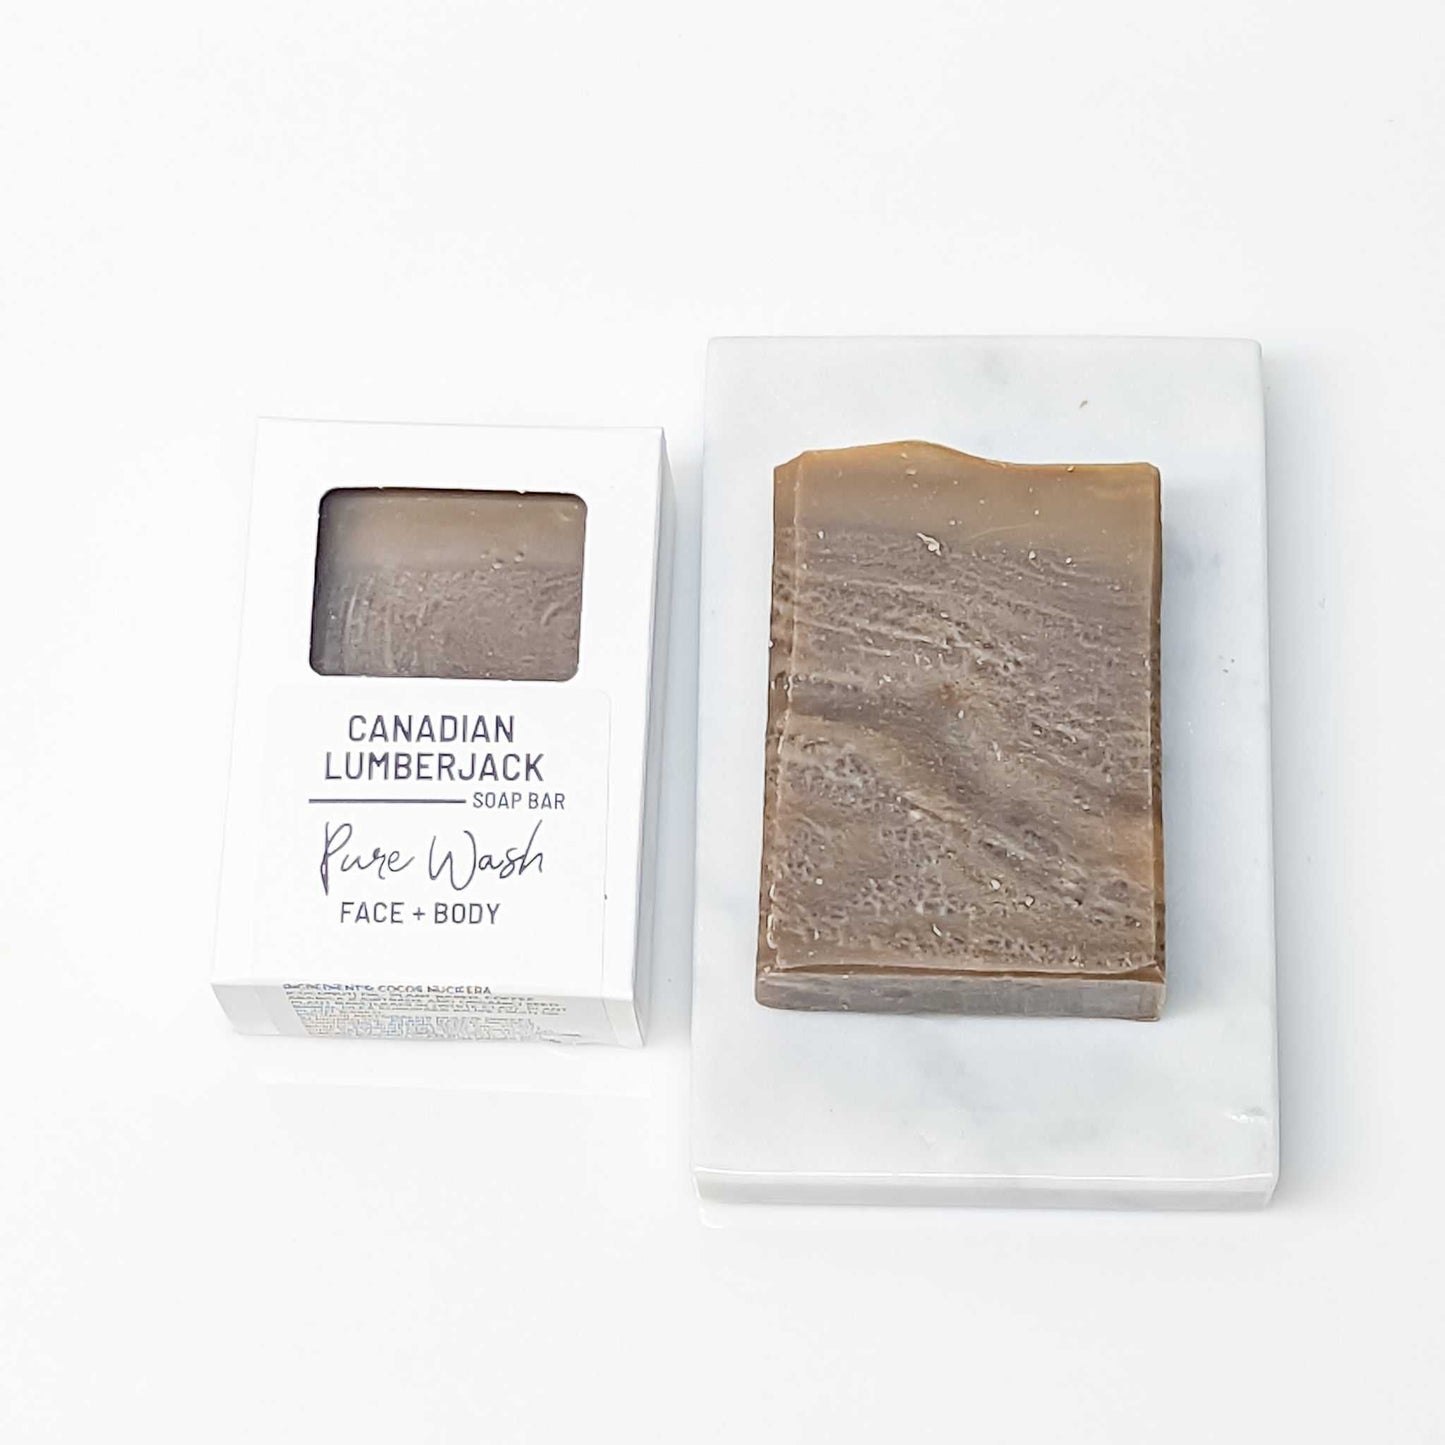 Experience the allure of the outdoors with our Canadian Lumberjack Soap Bar, carrying rich undertones of vanilla, cedarwood, patchouli, and musk | CG Pure Wash